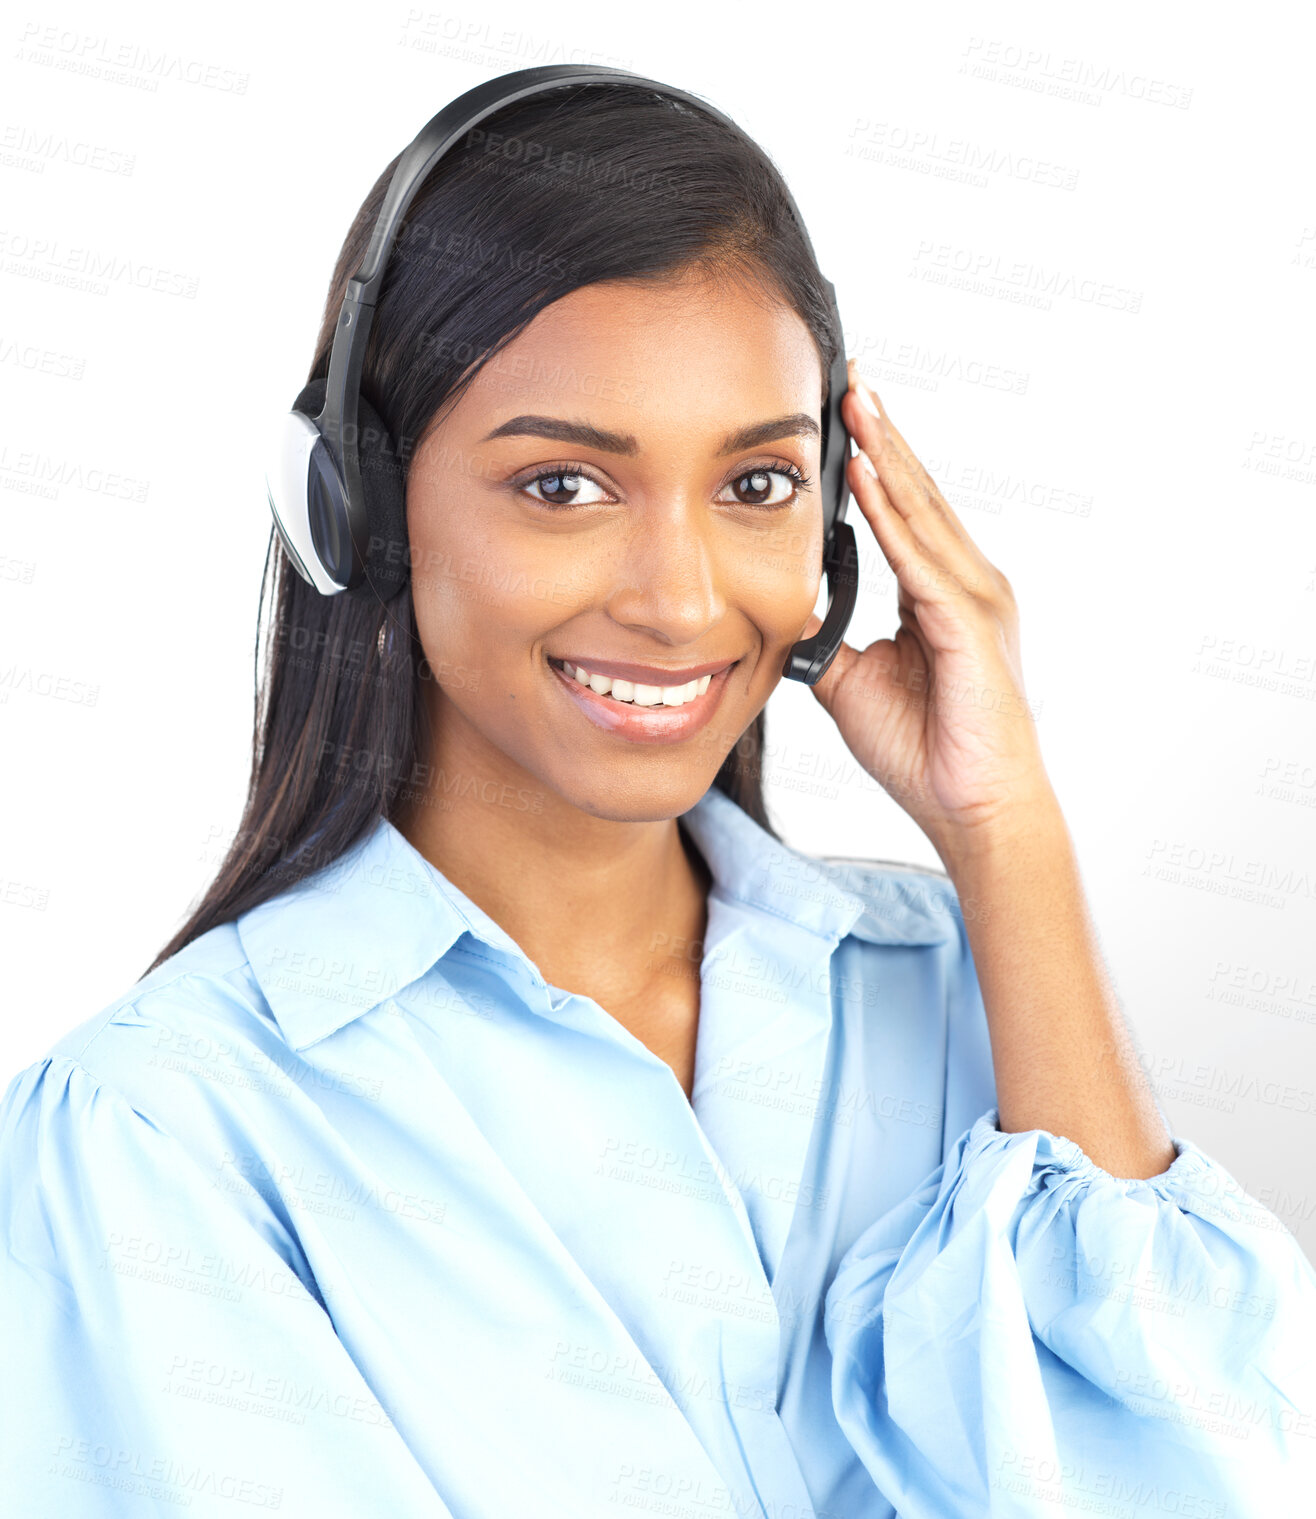 Buy stock photo Crm, customer service and portrait of Indian woman worker on a business call in a studio. Marketing, networking and web support consulting of a employee with a smile from call center sales work